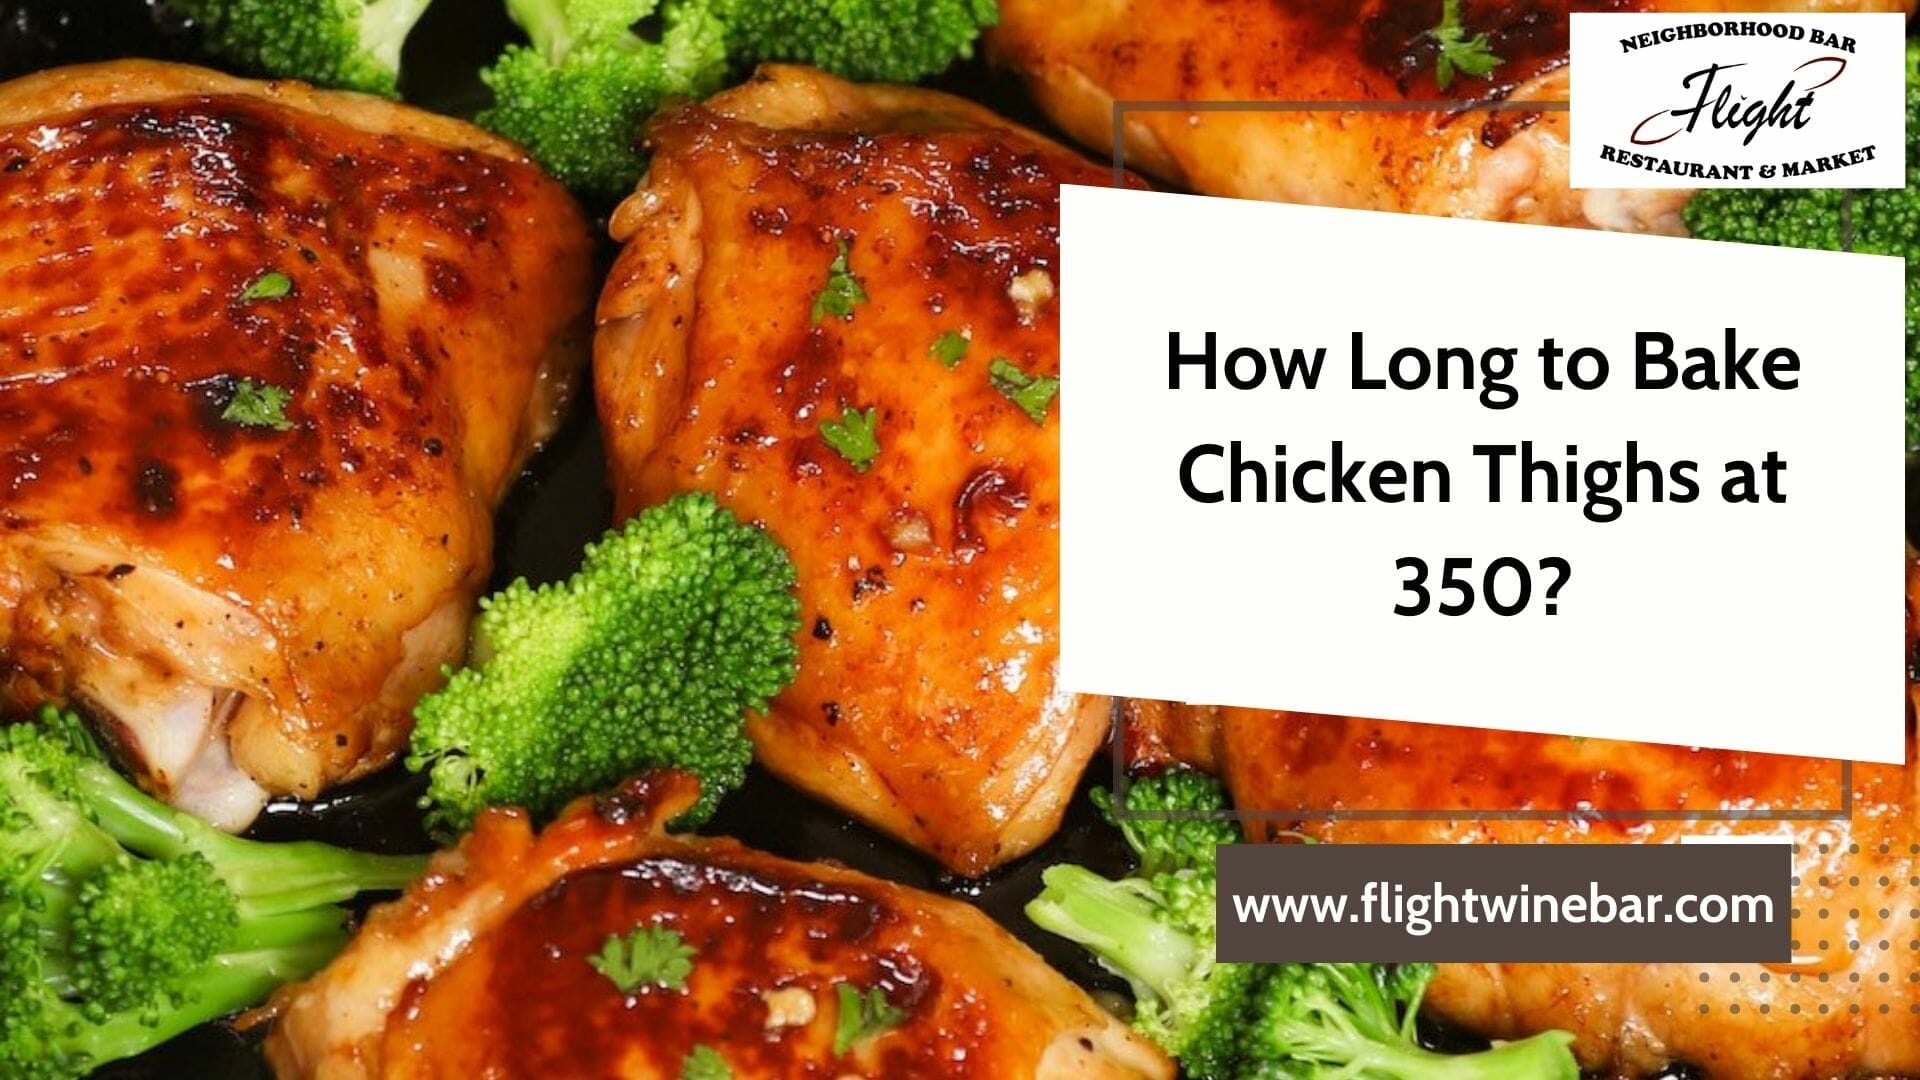 How Long to Bake Chicken Thighs at 350